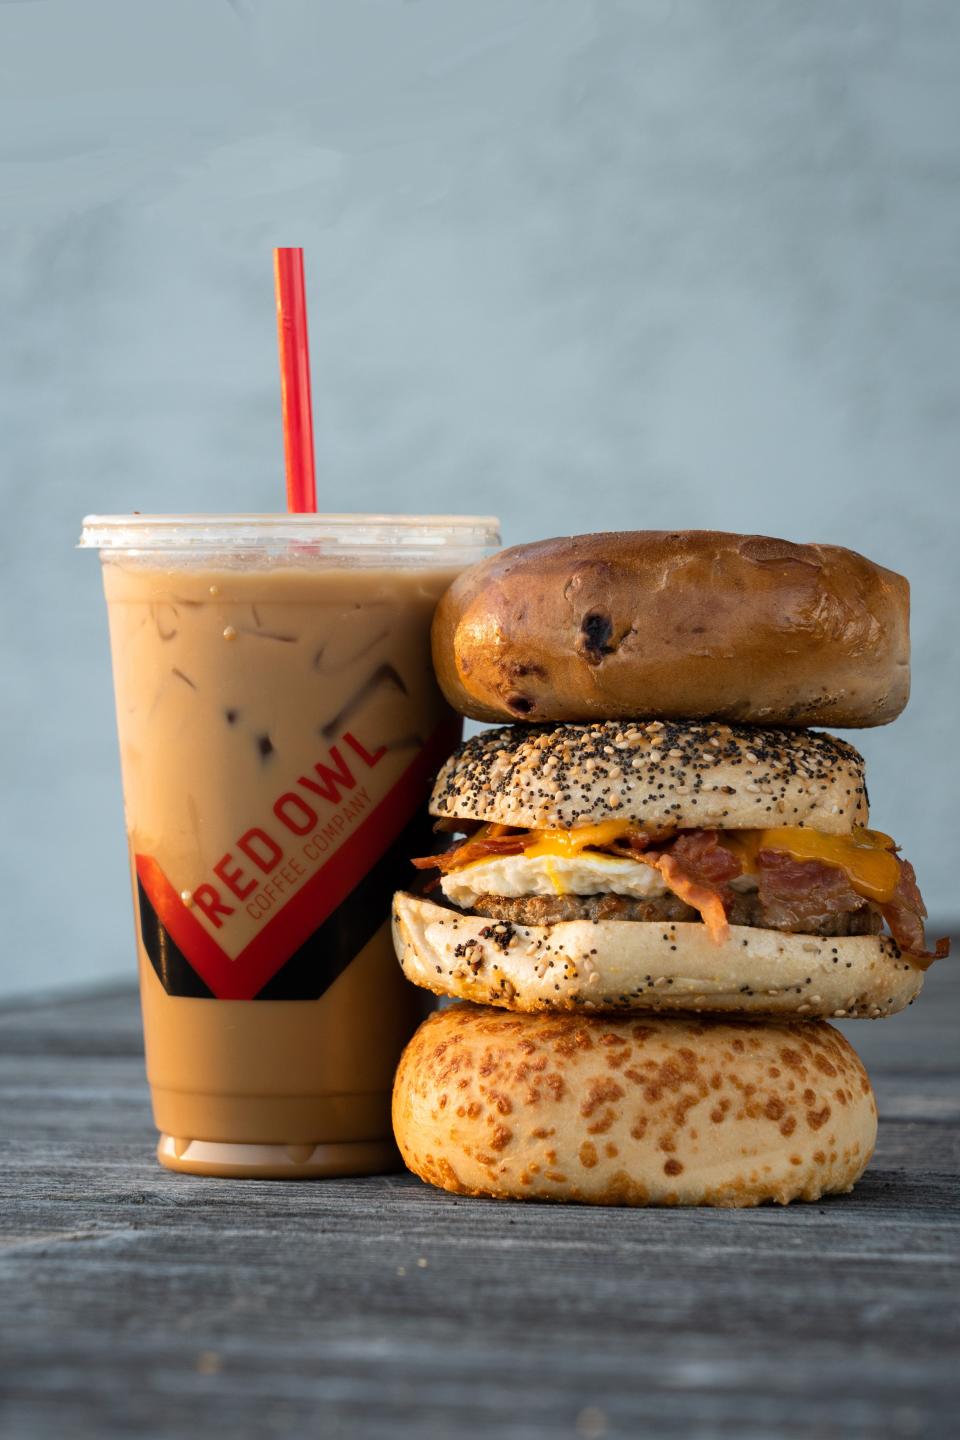 In addition to its lineup of coffee drinks, Red Owl offers a roster fof breakfast foods, including sandwiches, bagels, muffins and more.